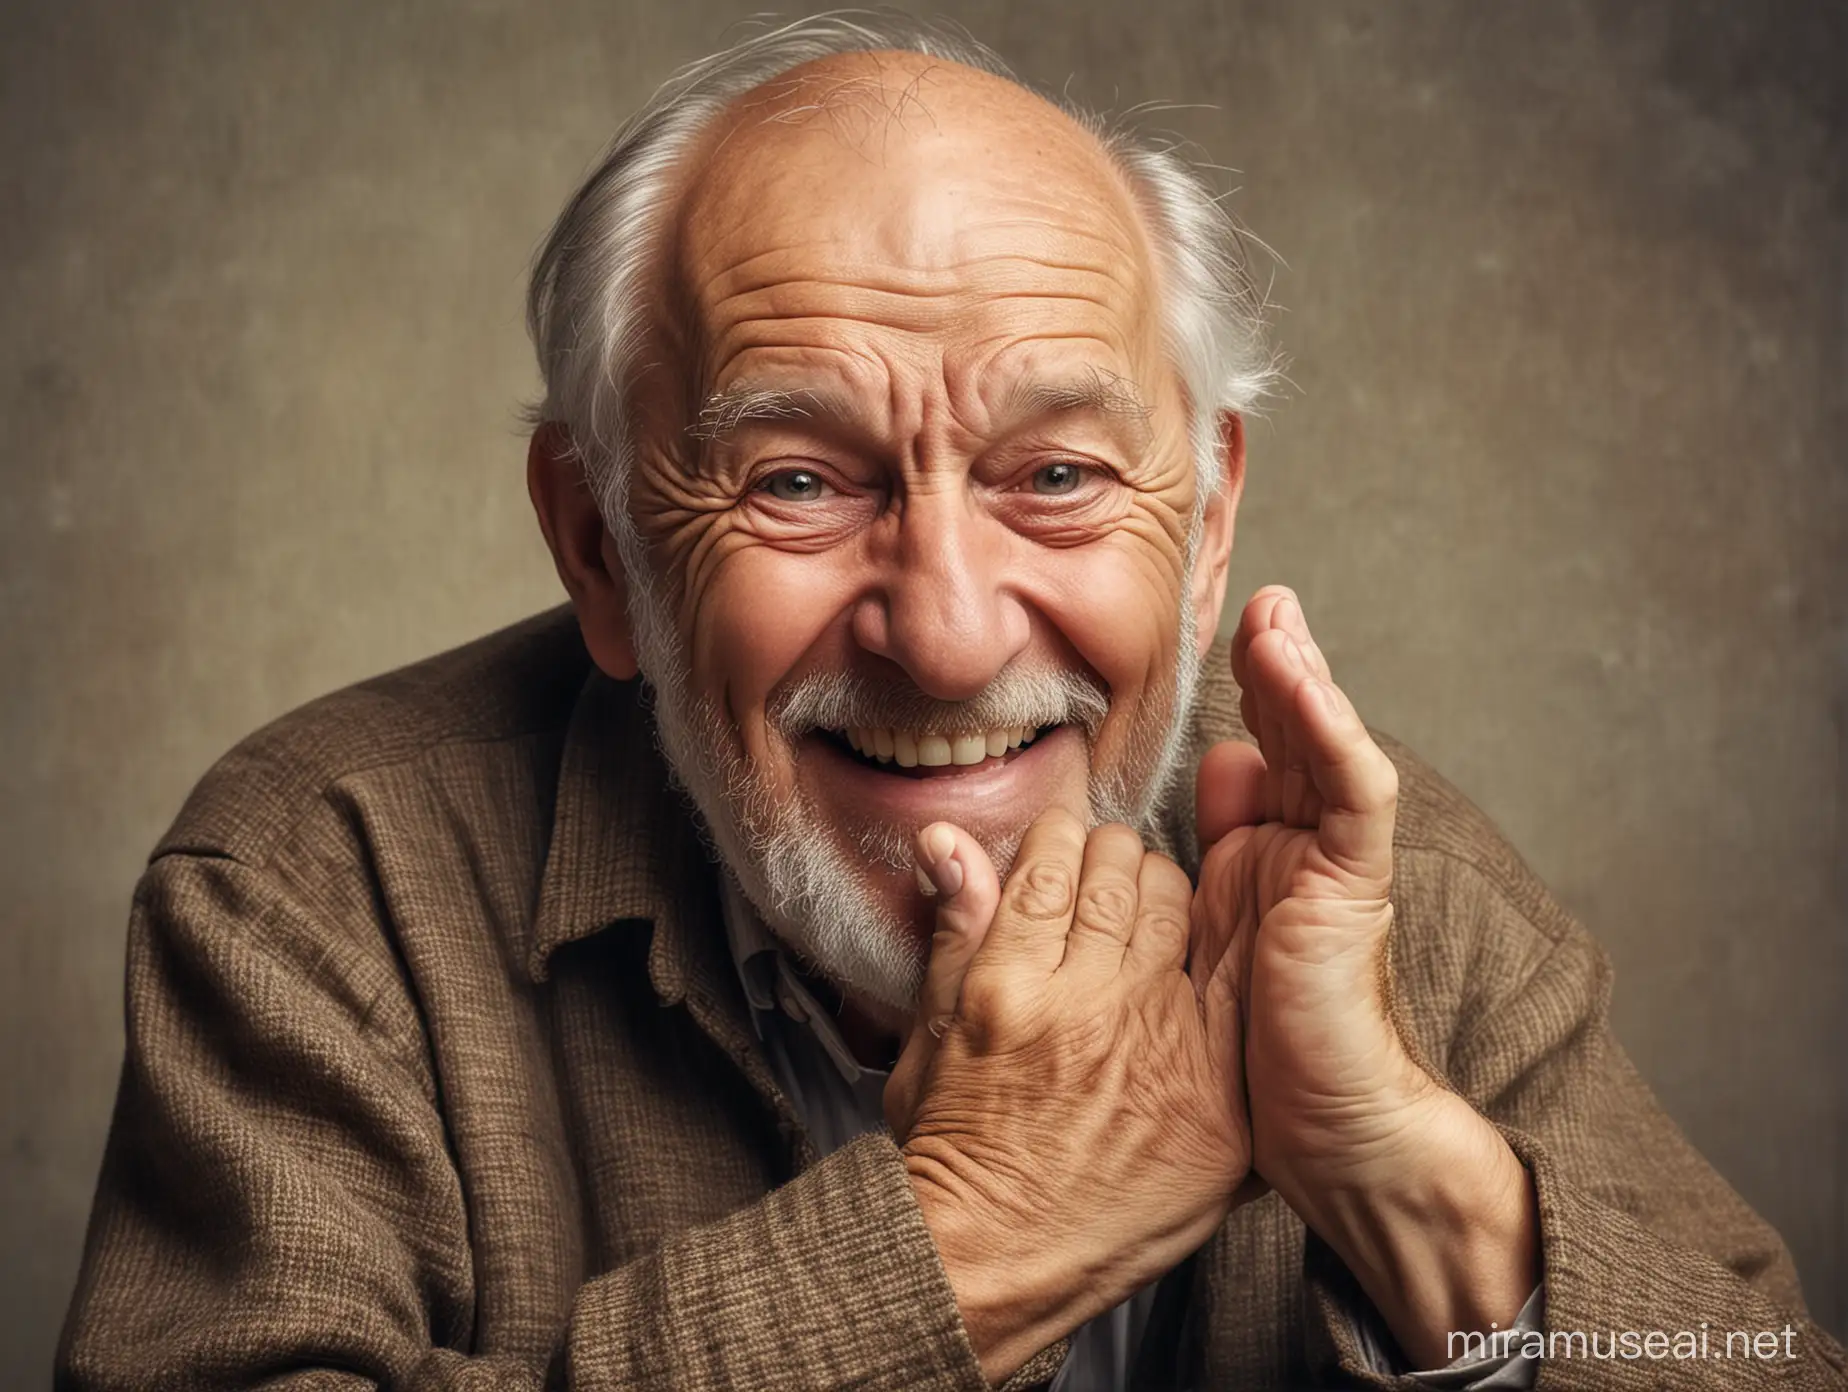 Rich and Greedy Old Man Laughing with Avarice